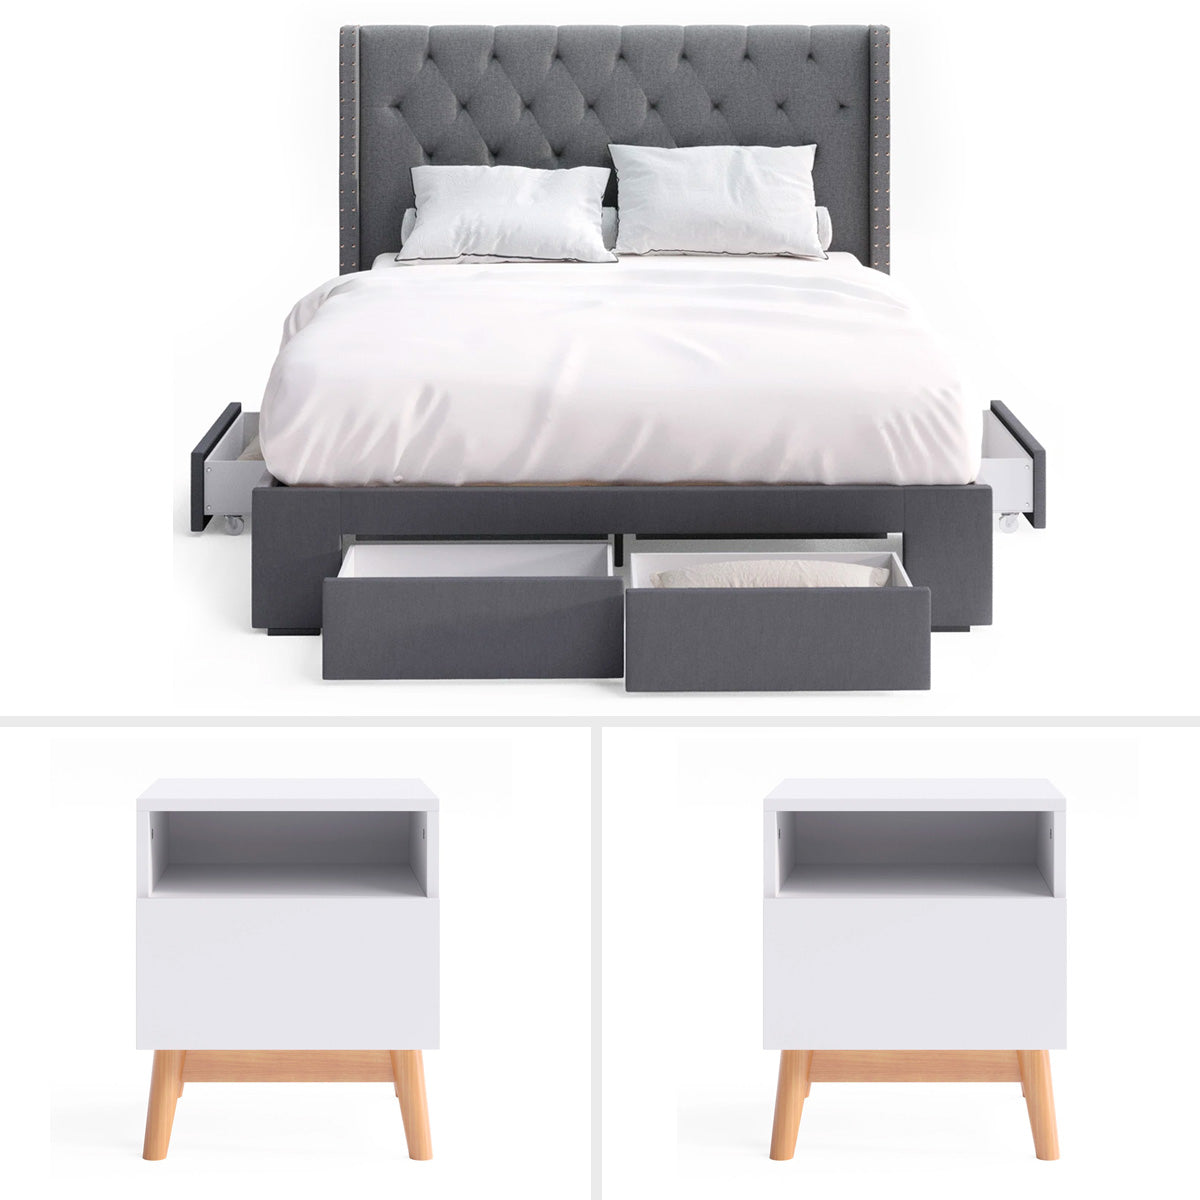 Charcoal Leonora Storage Bed Frame with Aspen Bedside Tables Package